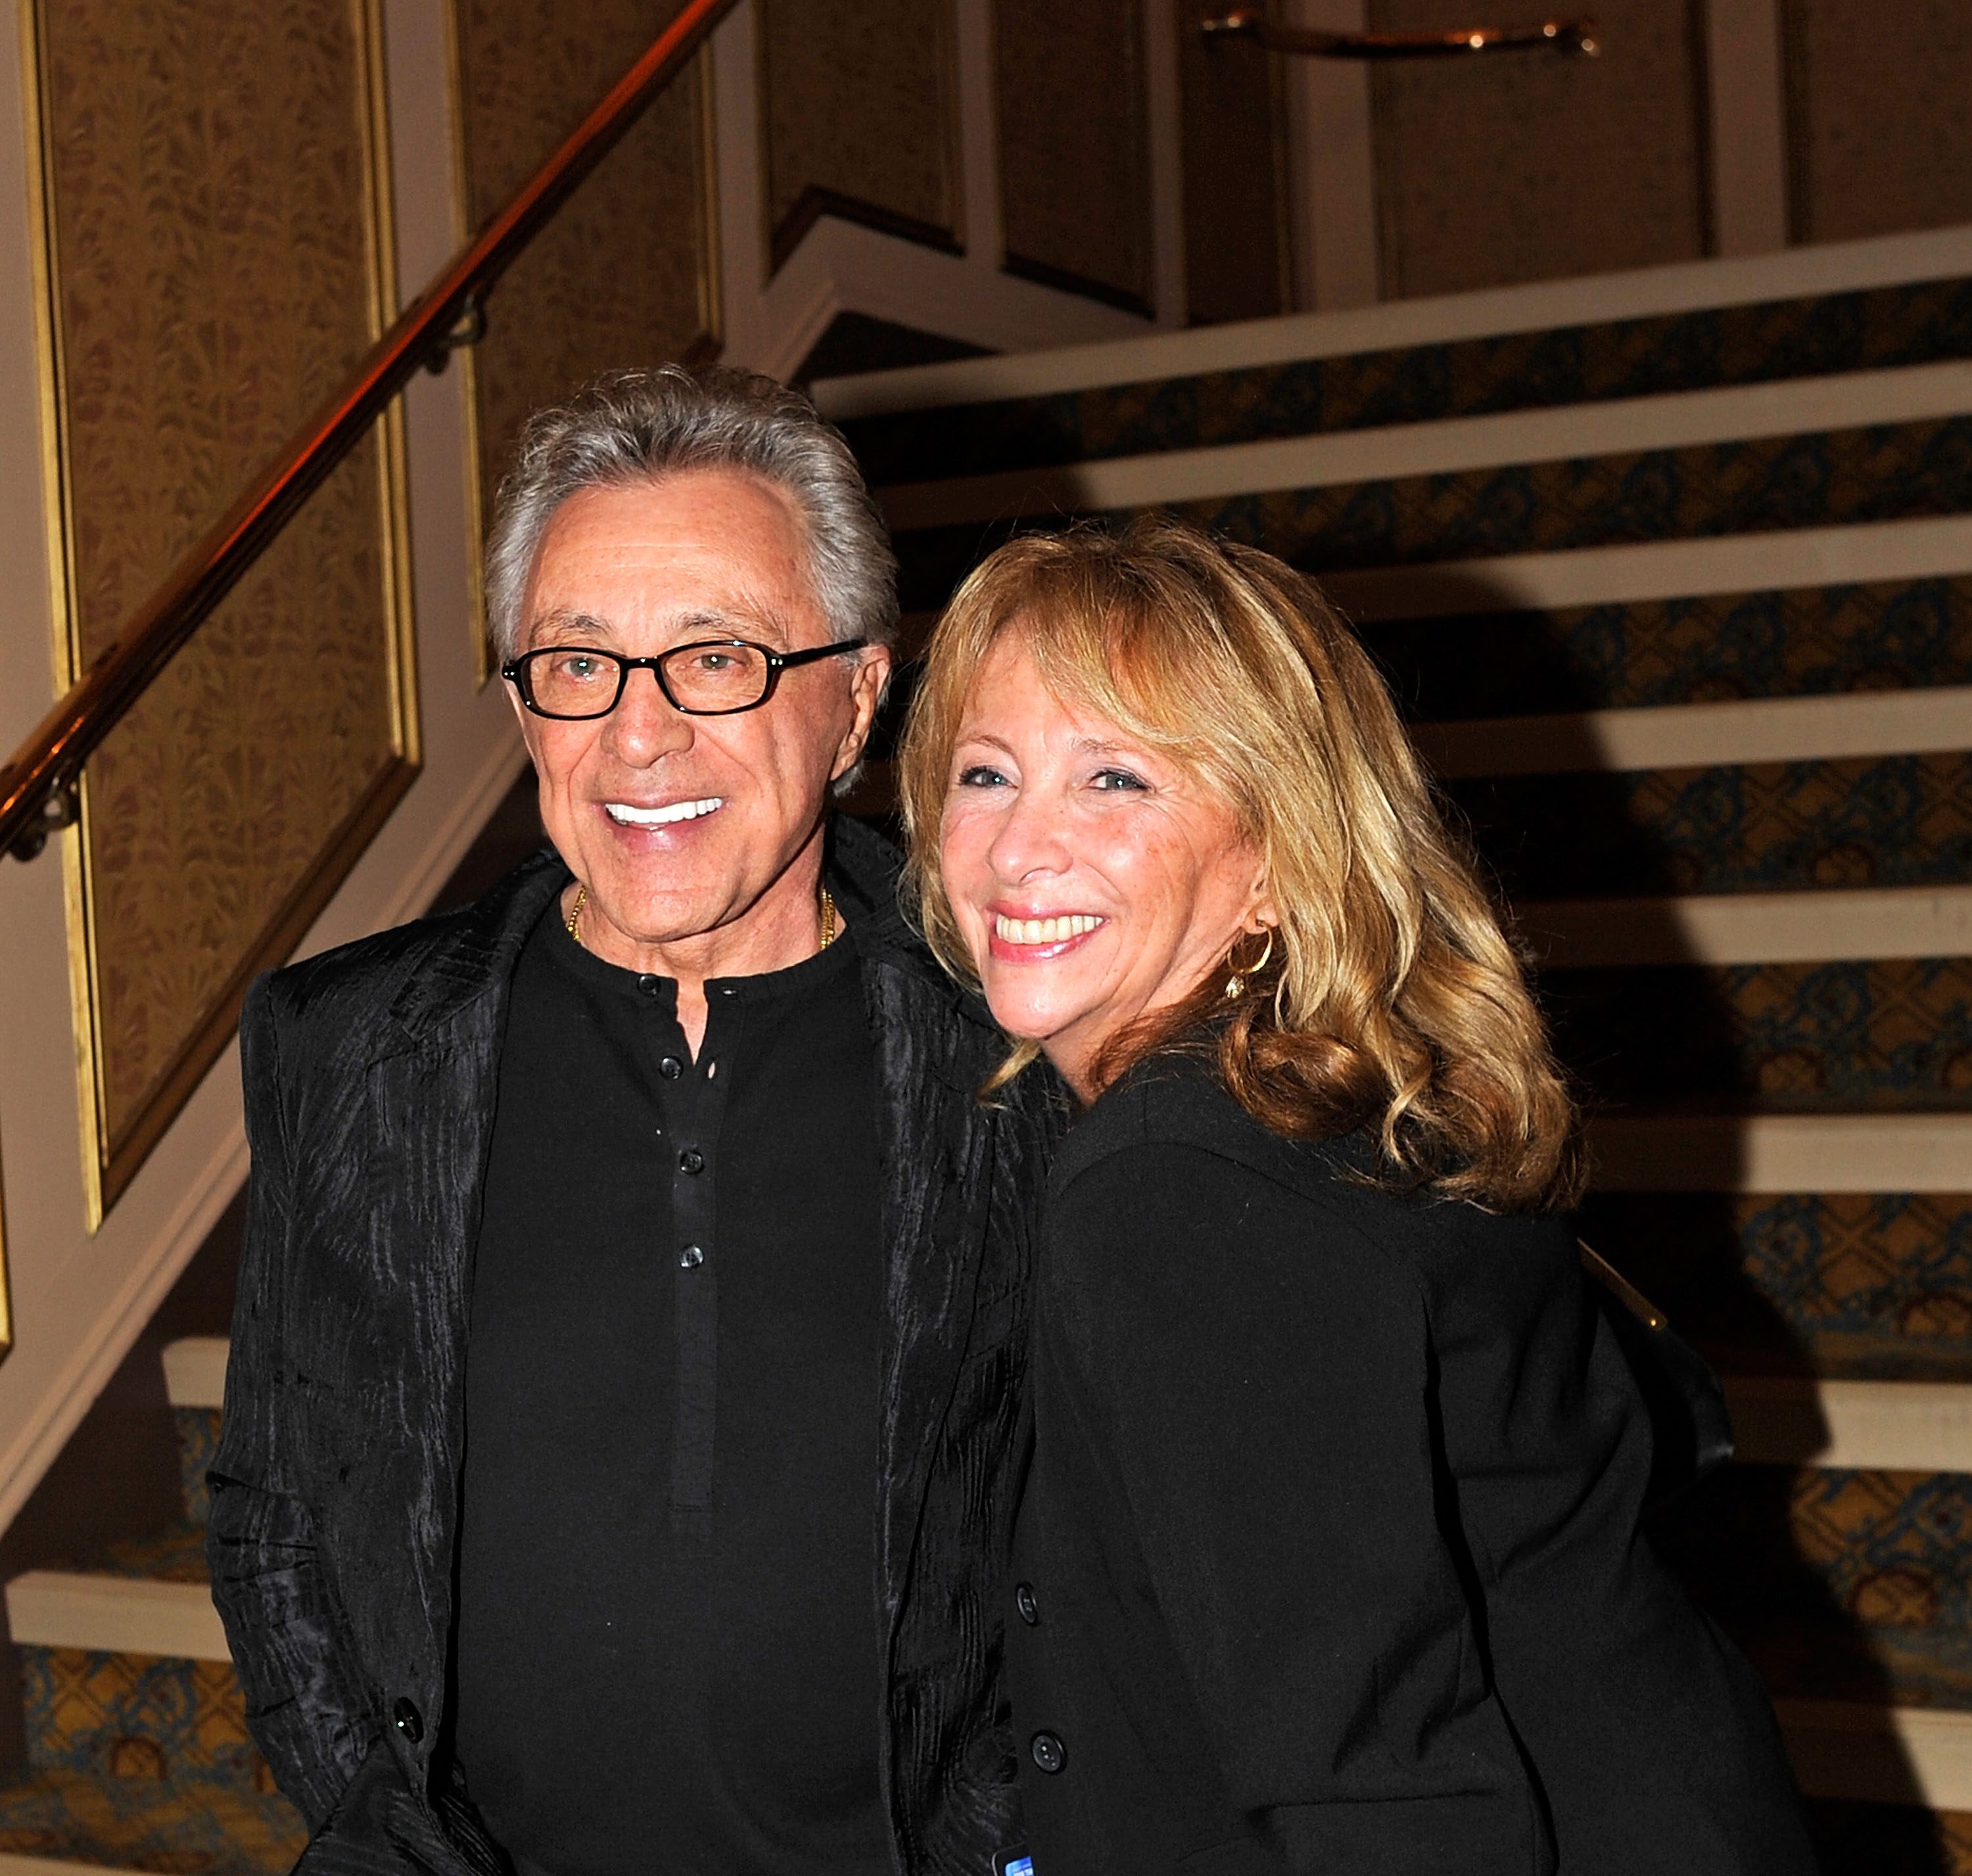 Frankie Valli and his daughter Toni Valli at Frankie Valli and The Four Seasons 50th Anniversary Celebration on October 19, 2012, in New York City | Source: Getty Images